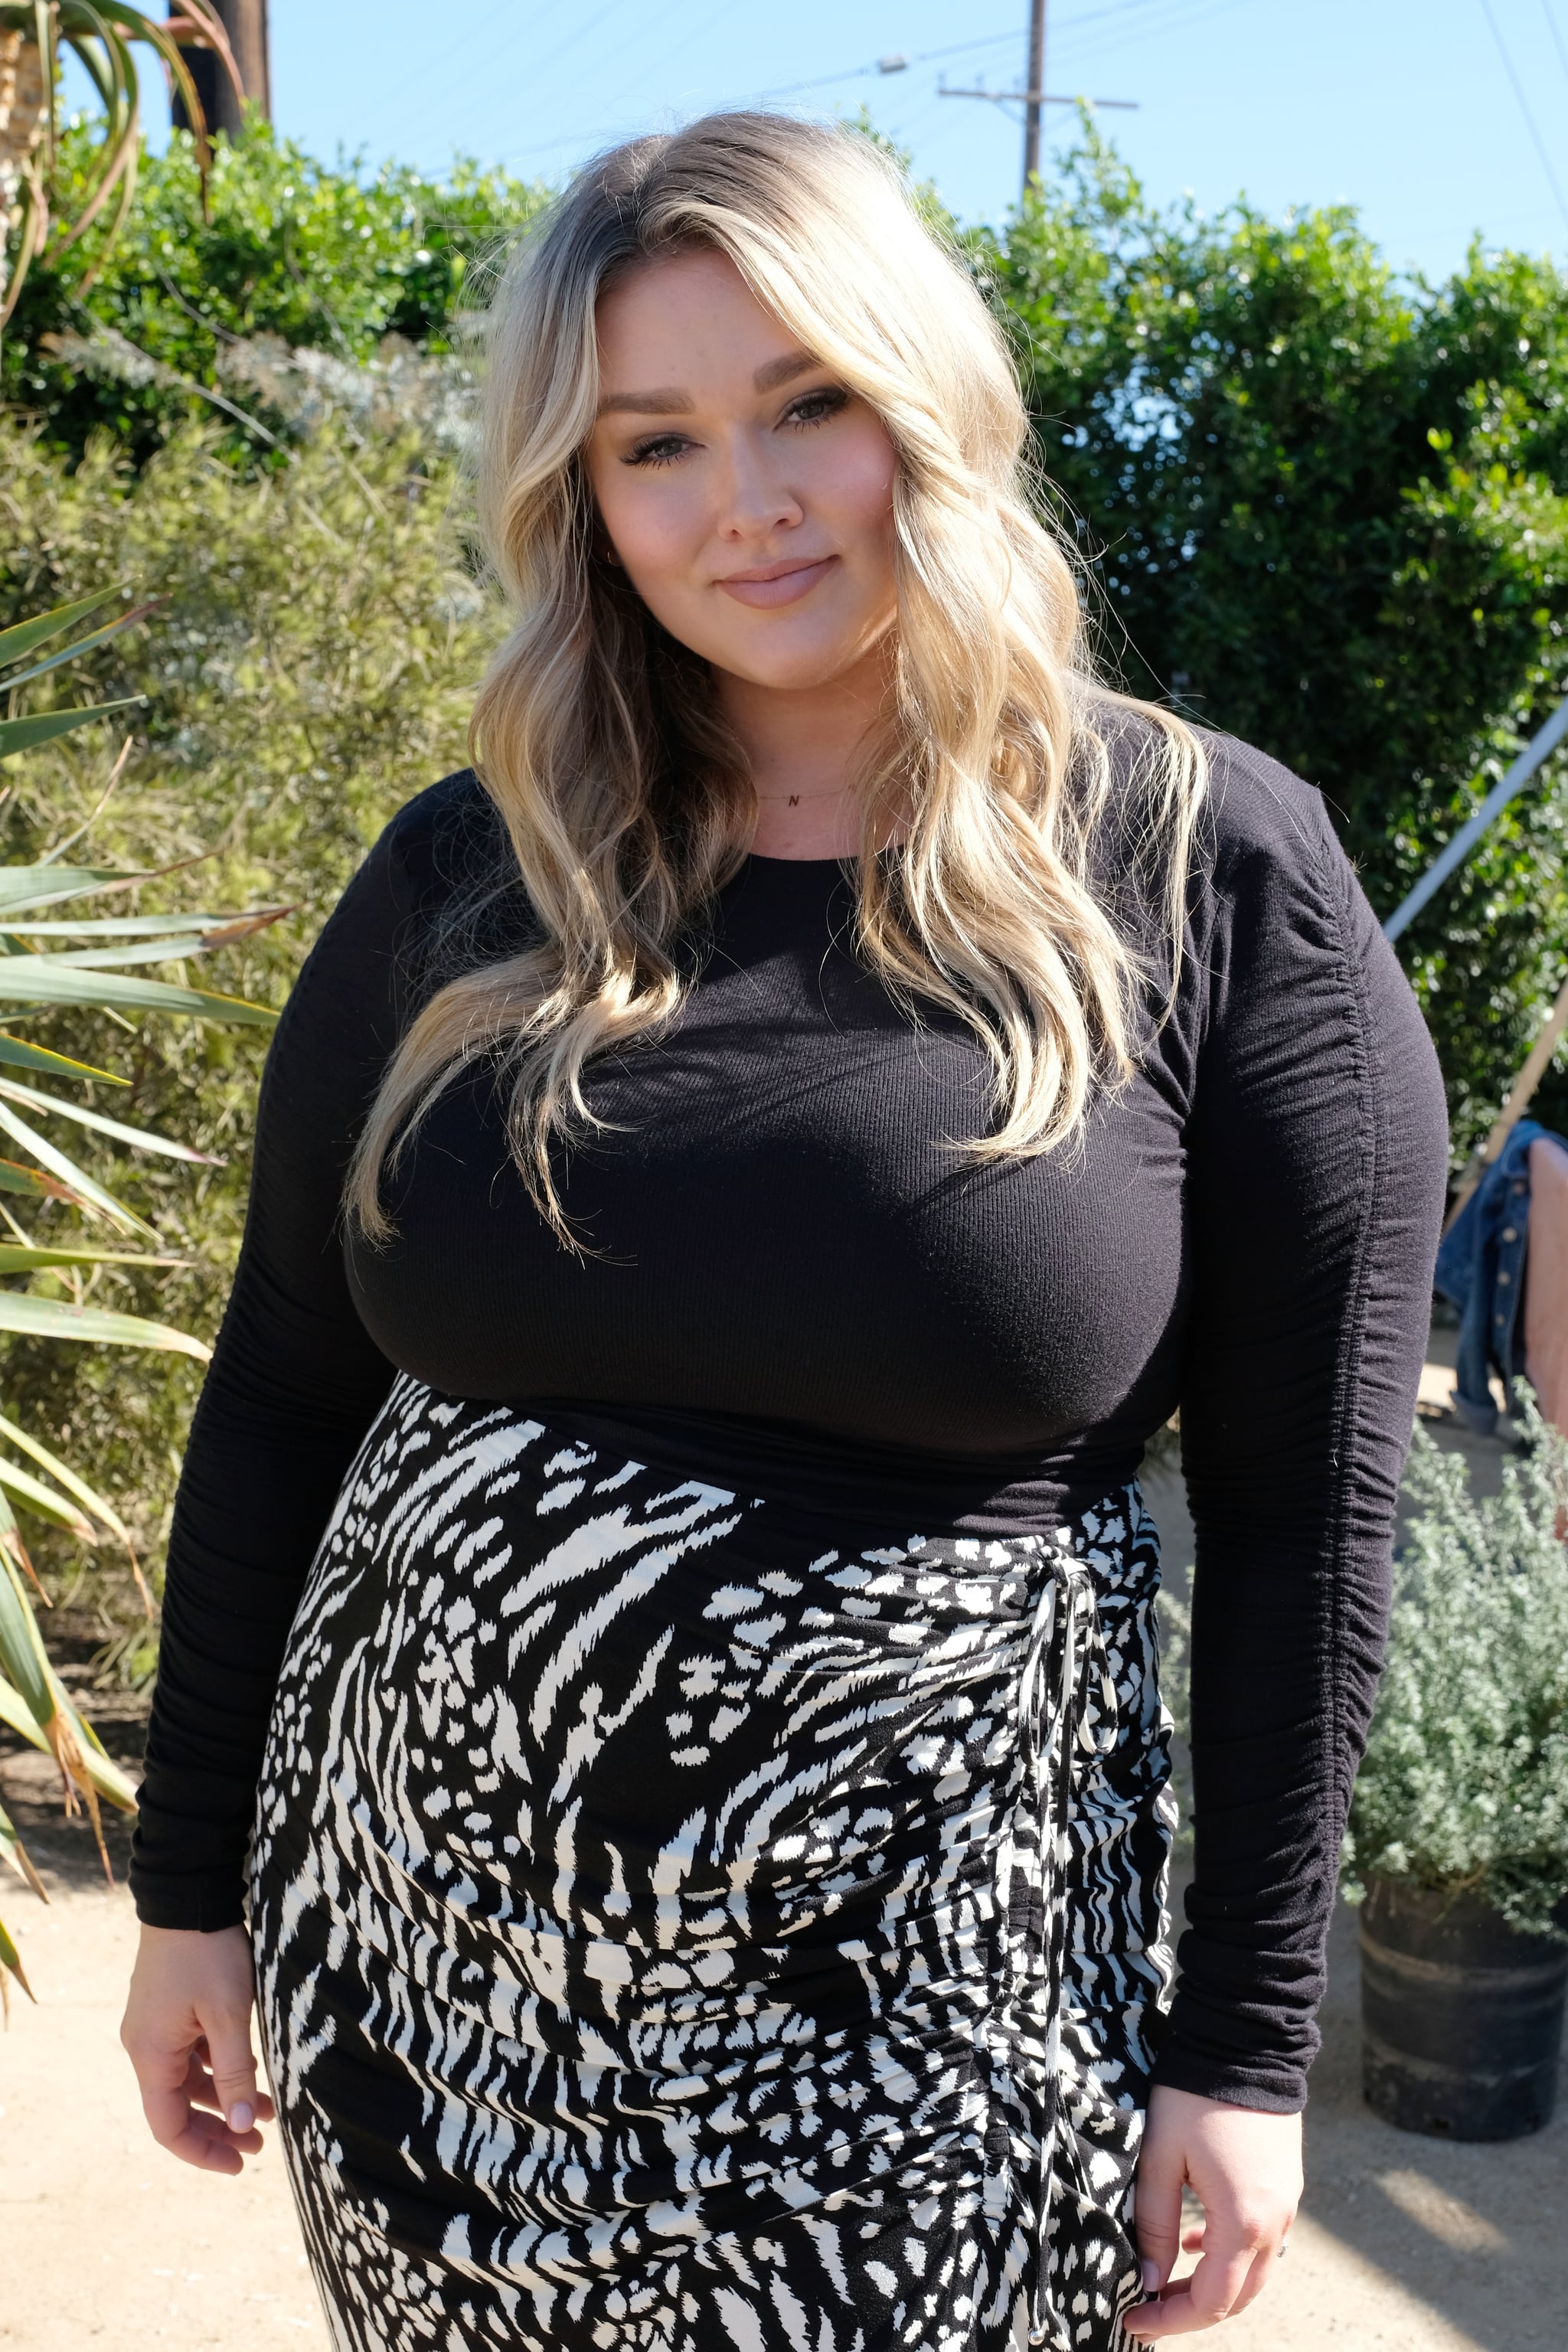 Los Angeles, CA-February 1: Model Hunter McGrady will attend # BlogHer20 Health at Rolling Greens Los Angeles on February 1, 2020 in Los Angeles, CA.  (Photo by Sarah Morris / Getty Images)